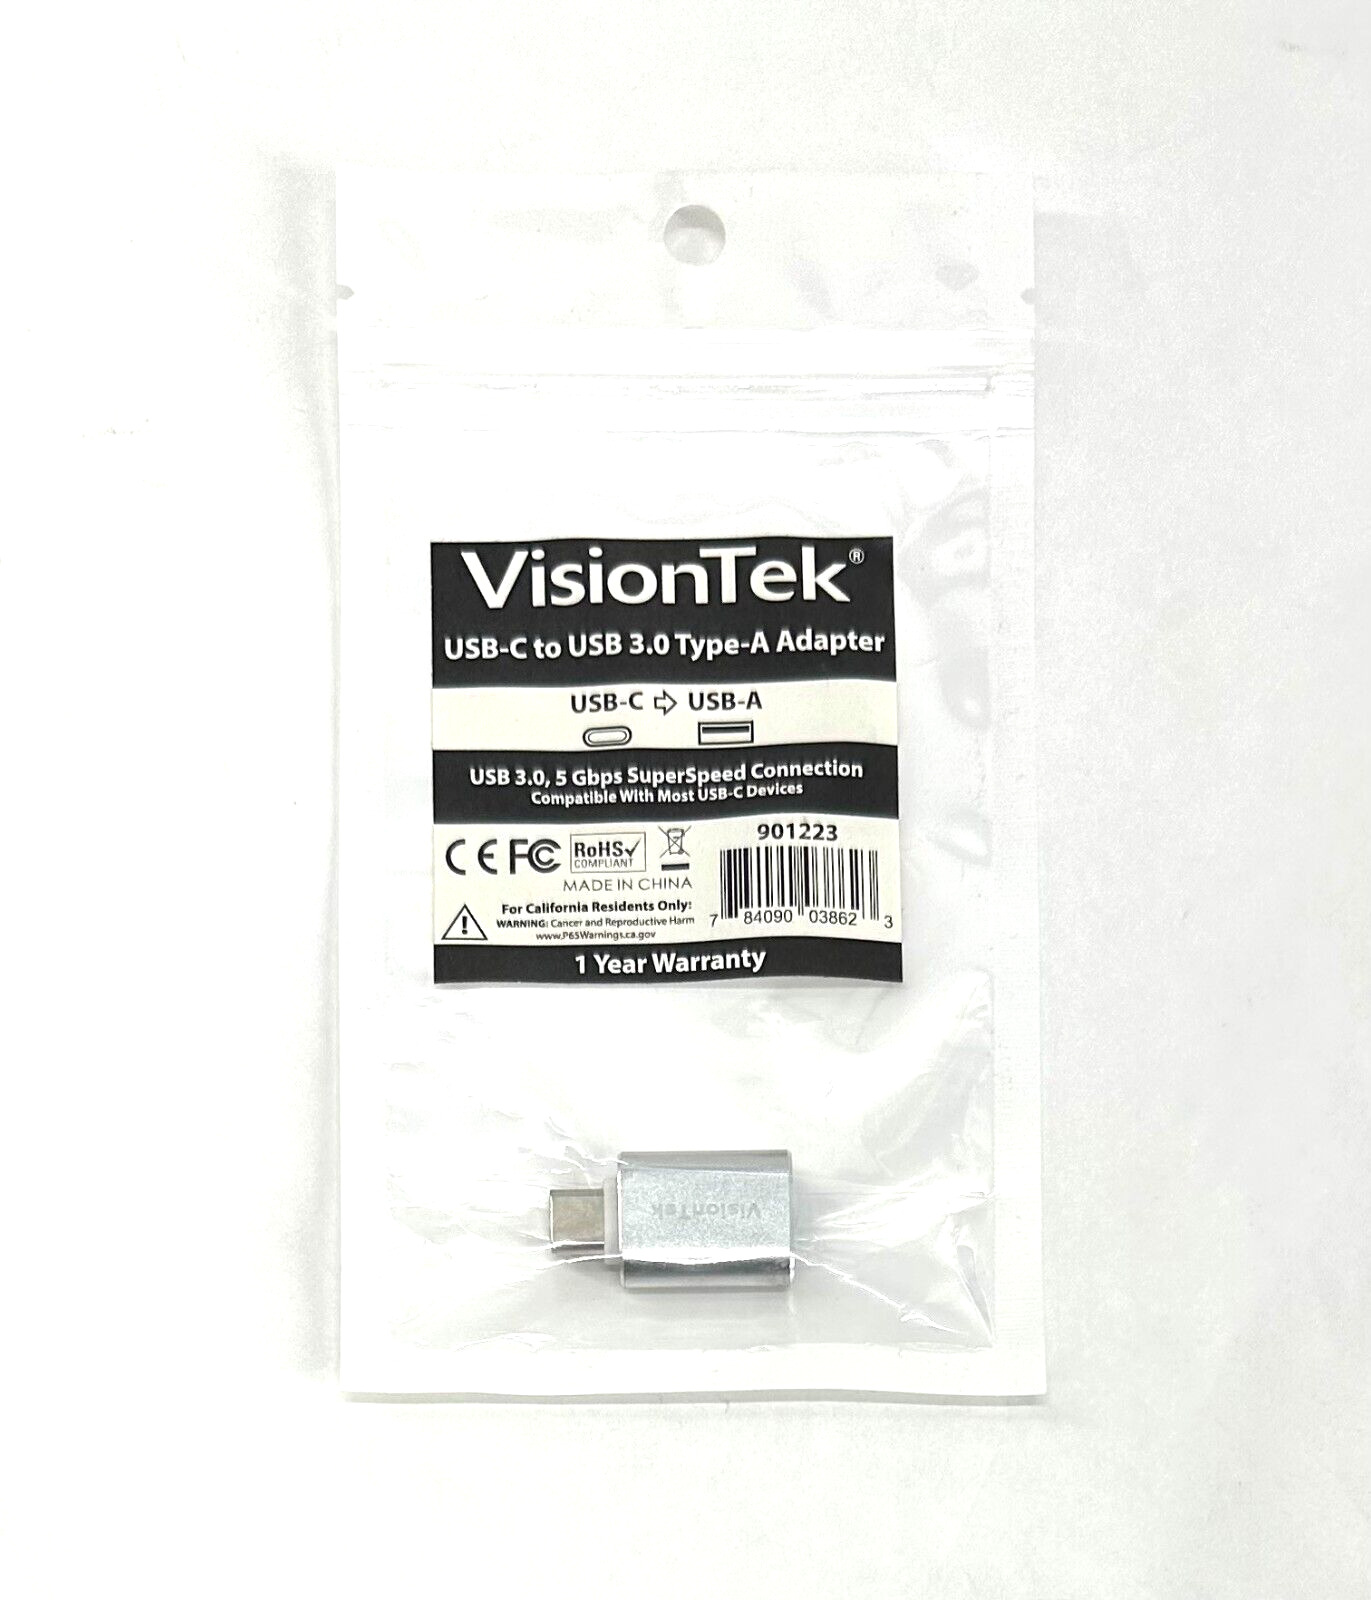 901223 VISIONTEK USB-C to USB 3.0 TYPE-A ADAPTER USB C - USB A new~